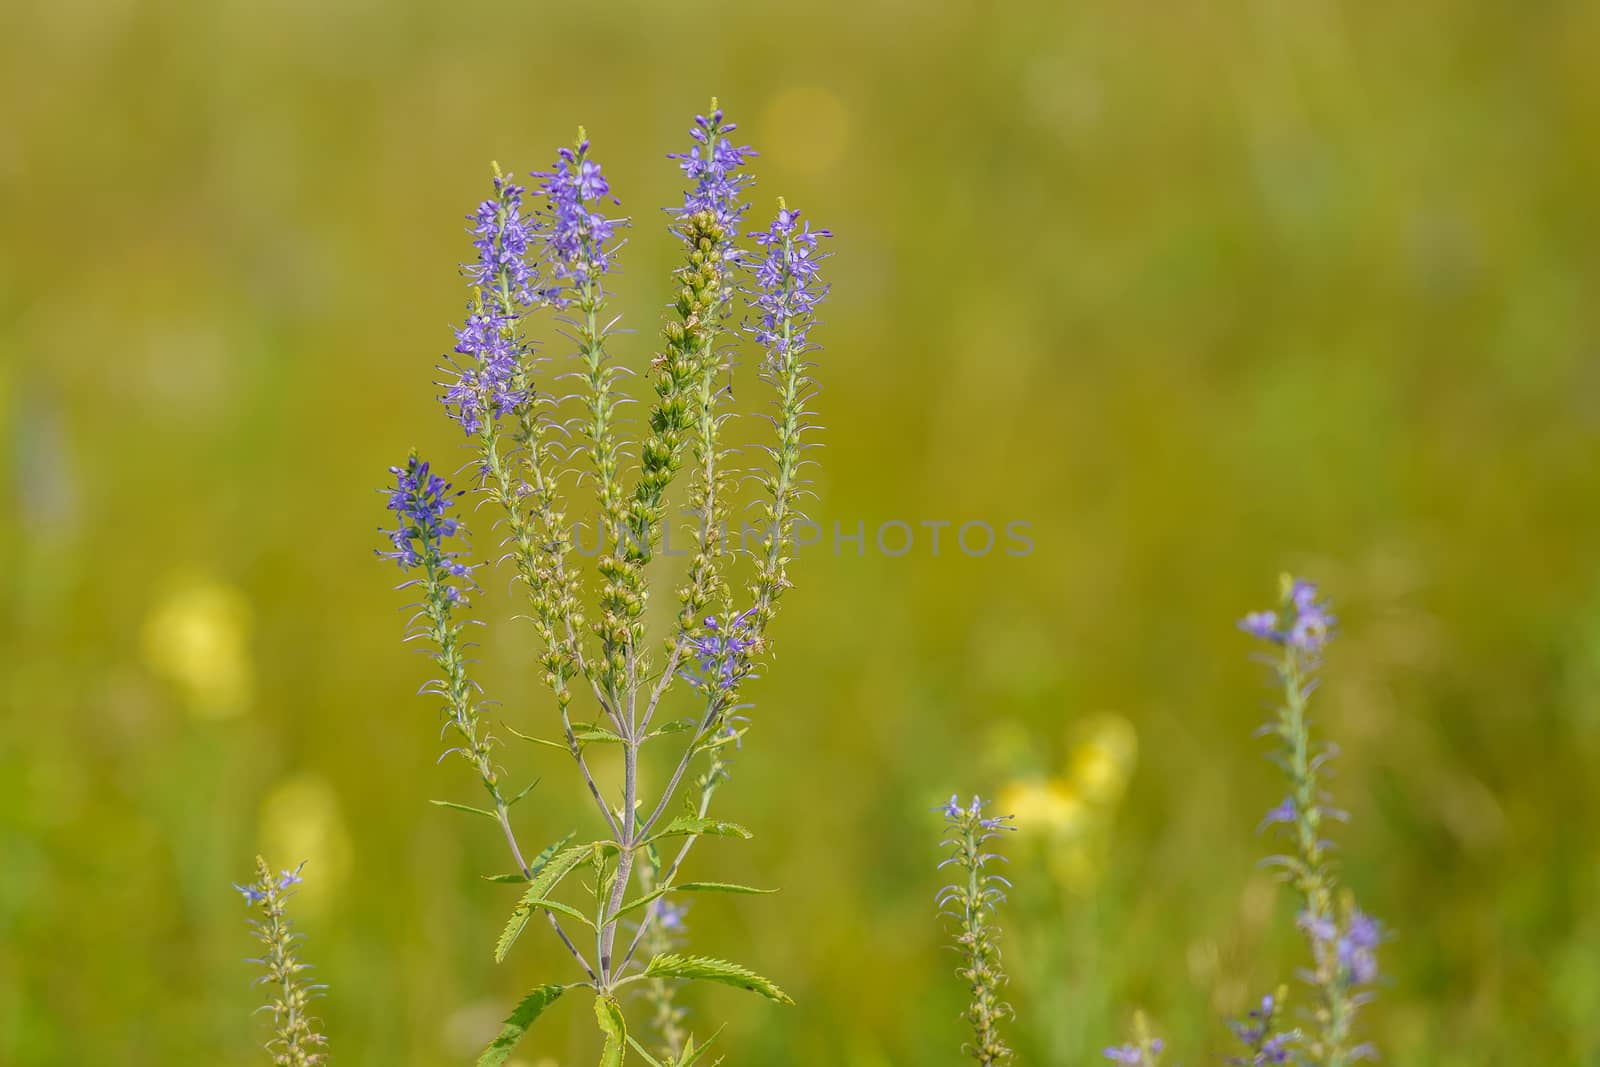 Veronica longifolia, grassy plant with a high stem and blue flowers by VADIM